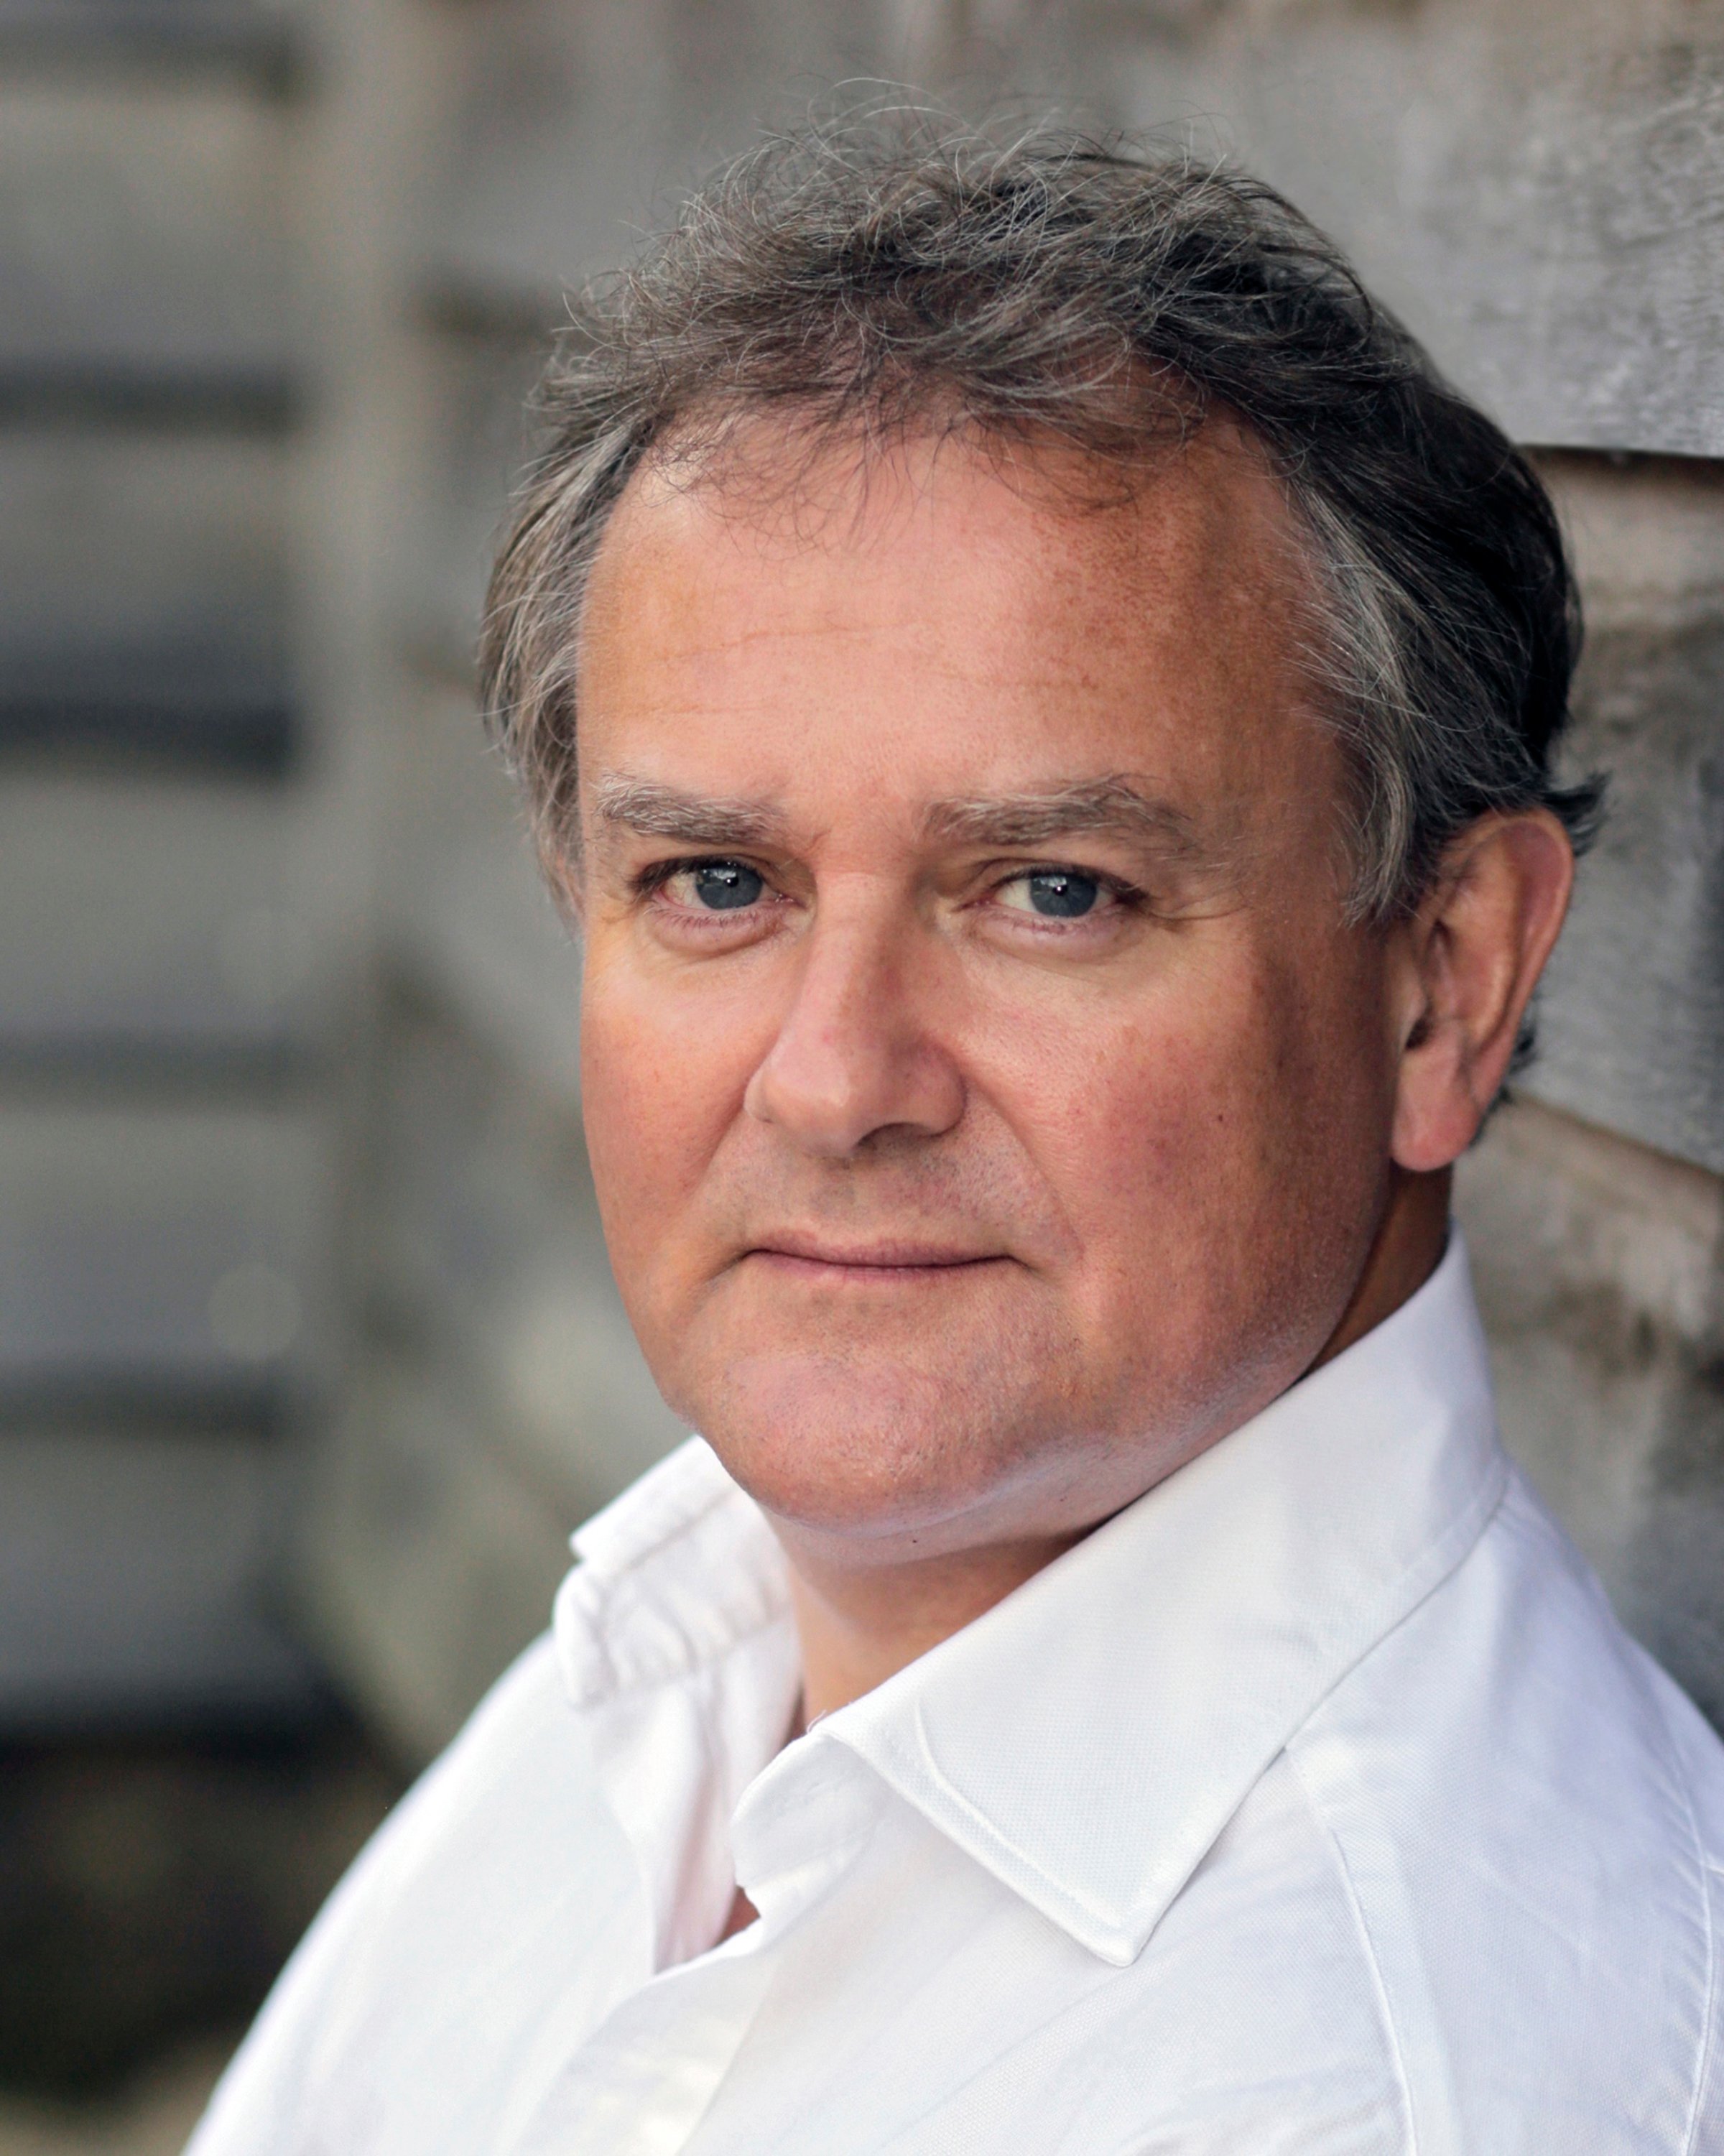 Hugh Bonneville, who plays the Earl of Grantham on Downton Abbey.